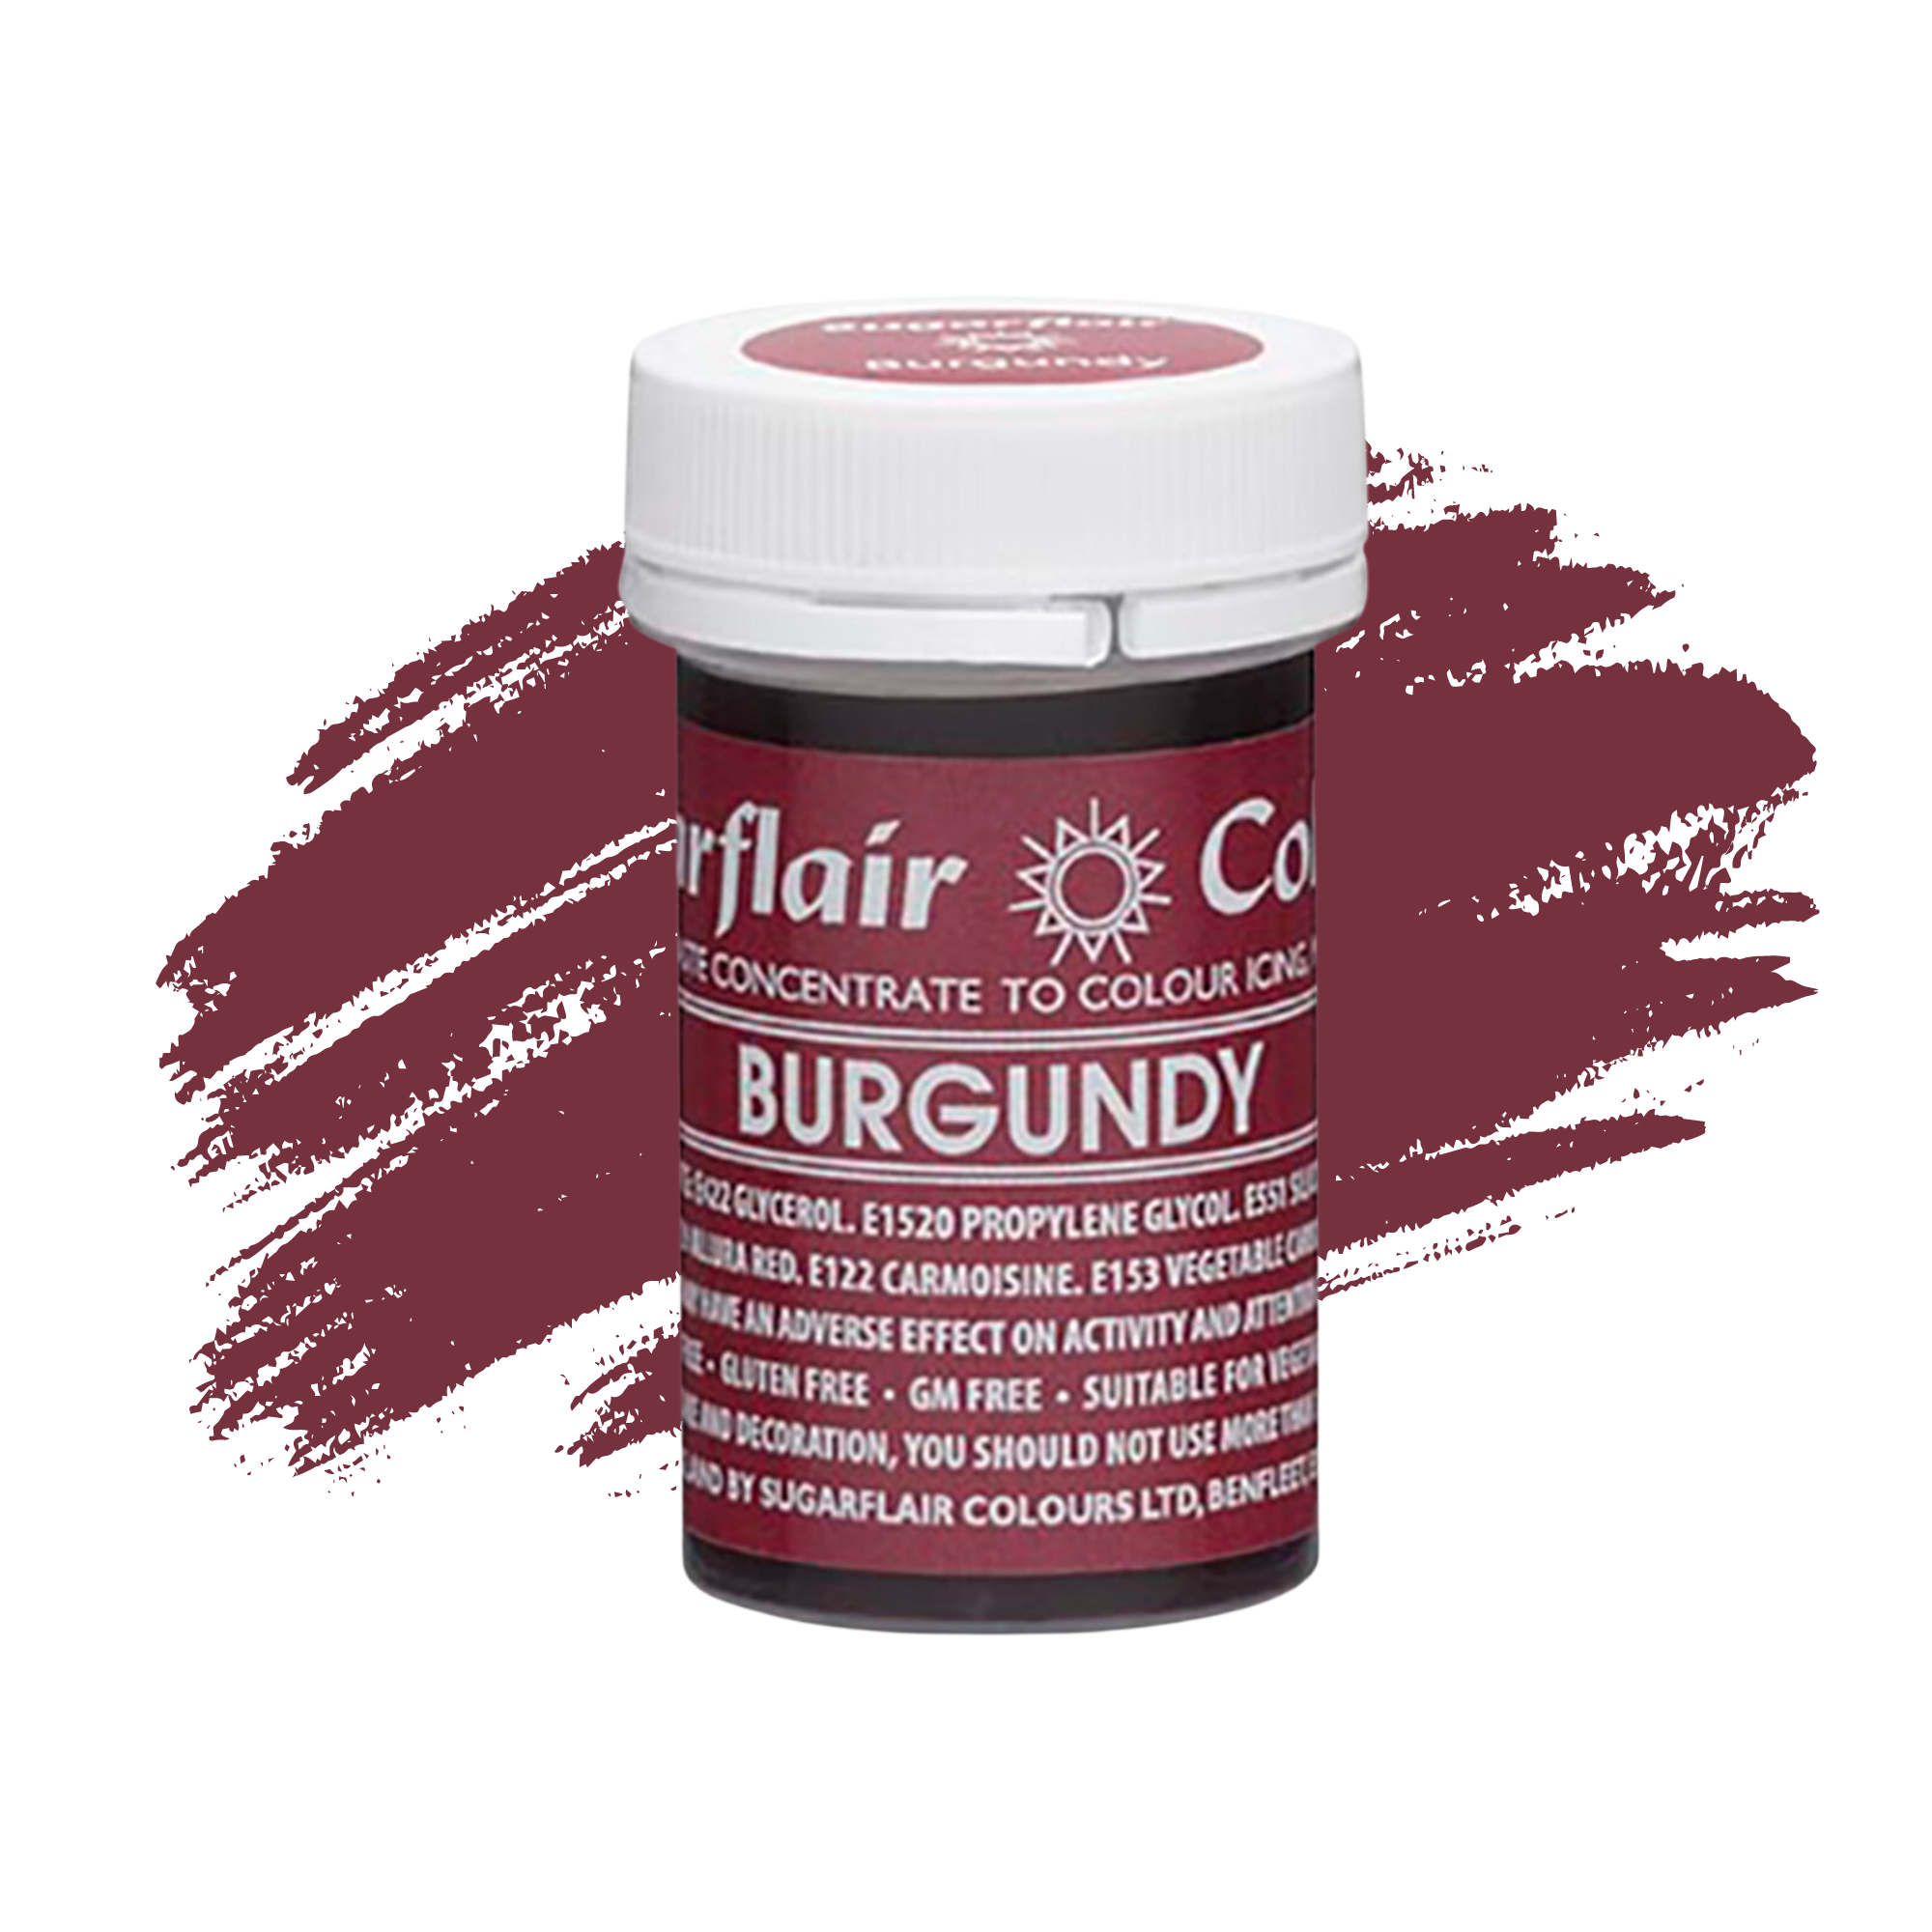 Sugarflair Paste Colours Concentrated Food Colouring - Spectral Burgundy - 25g - Kate's Cupboard